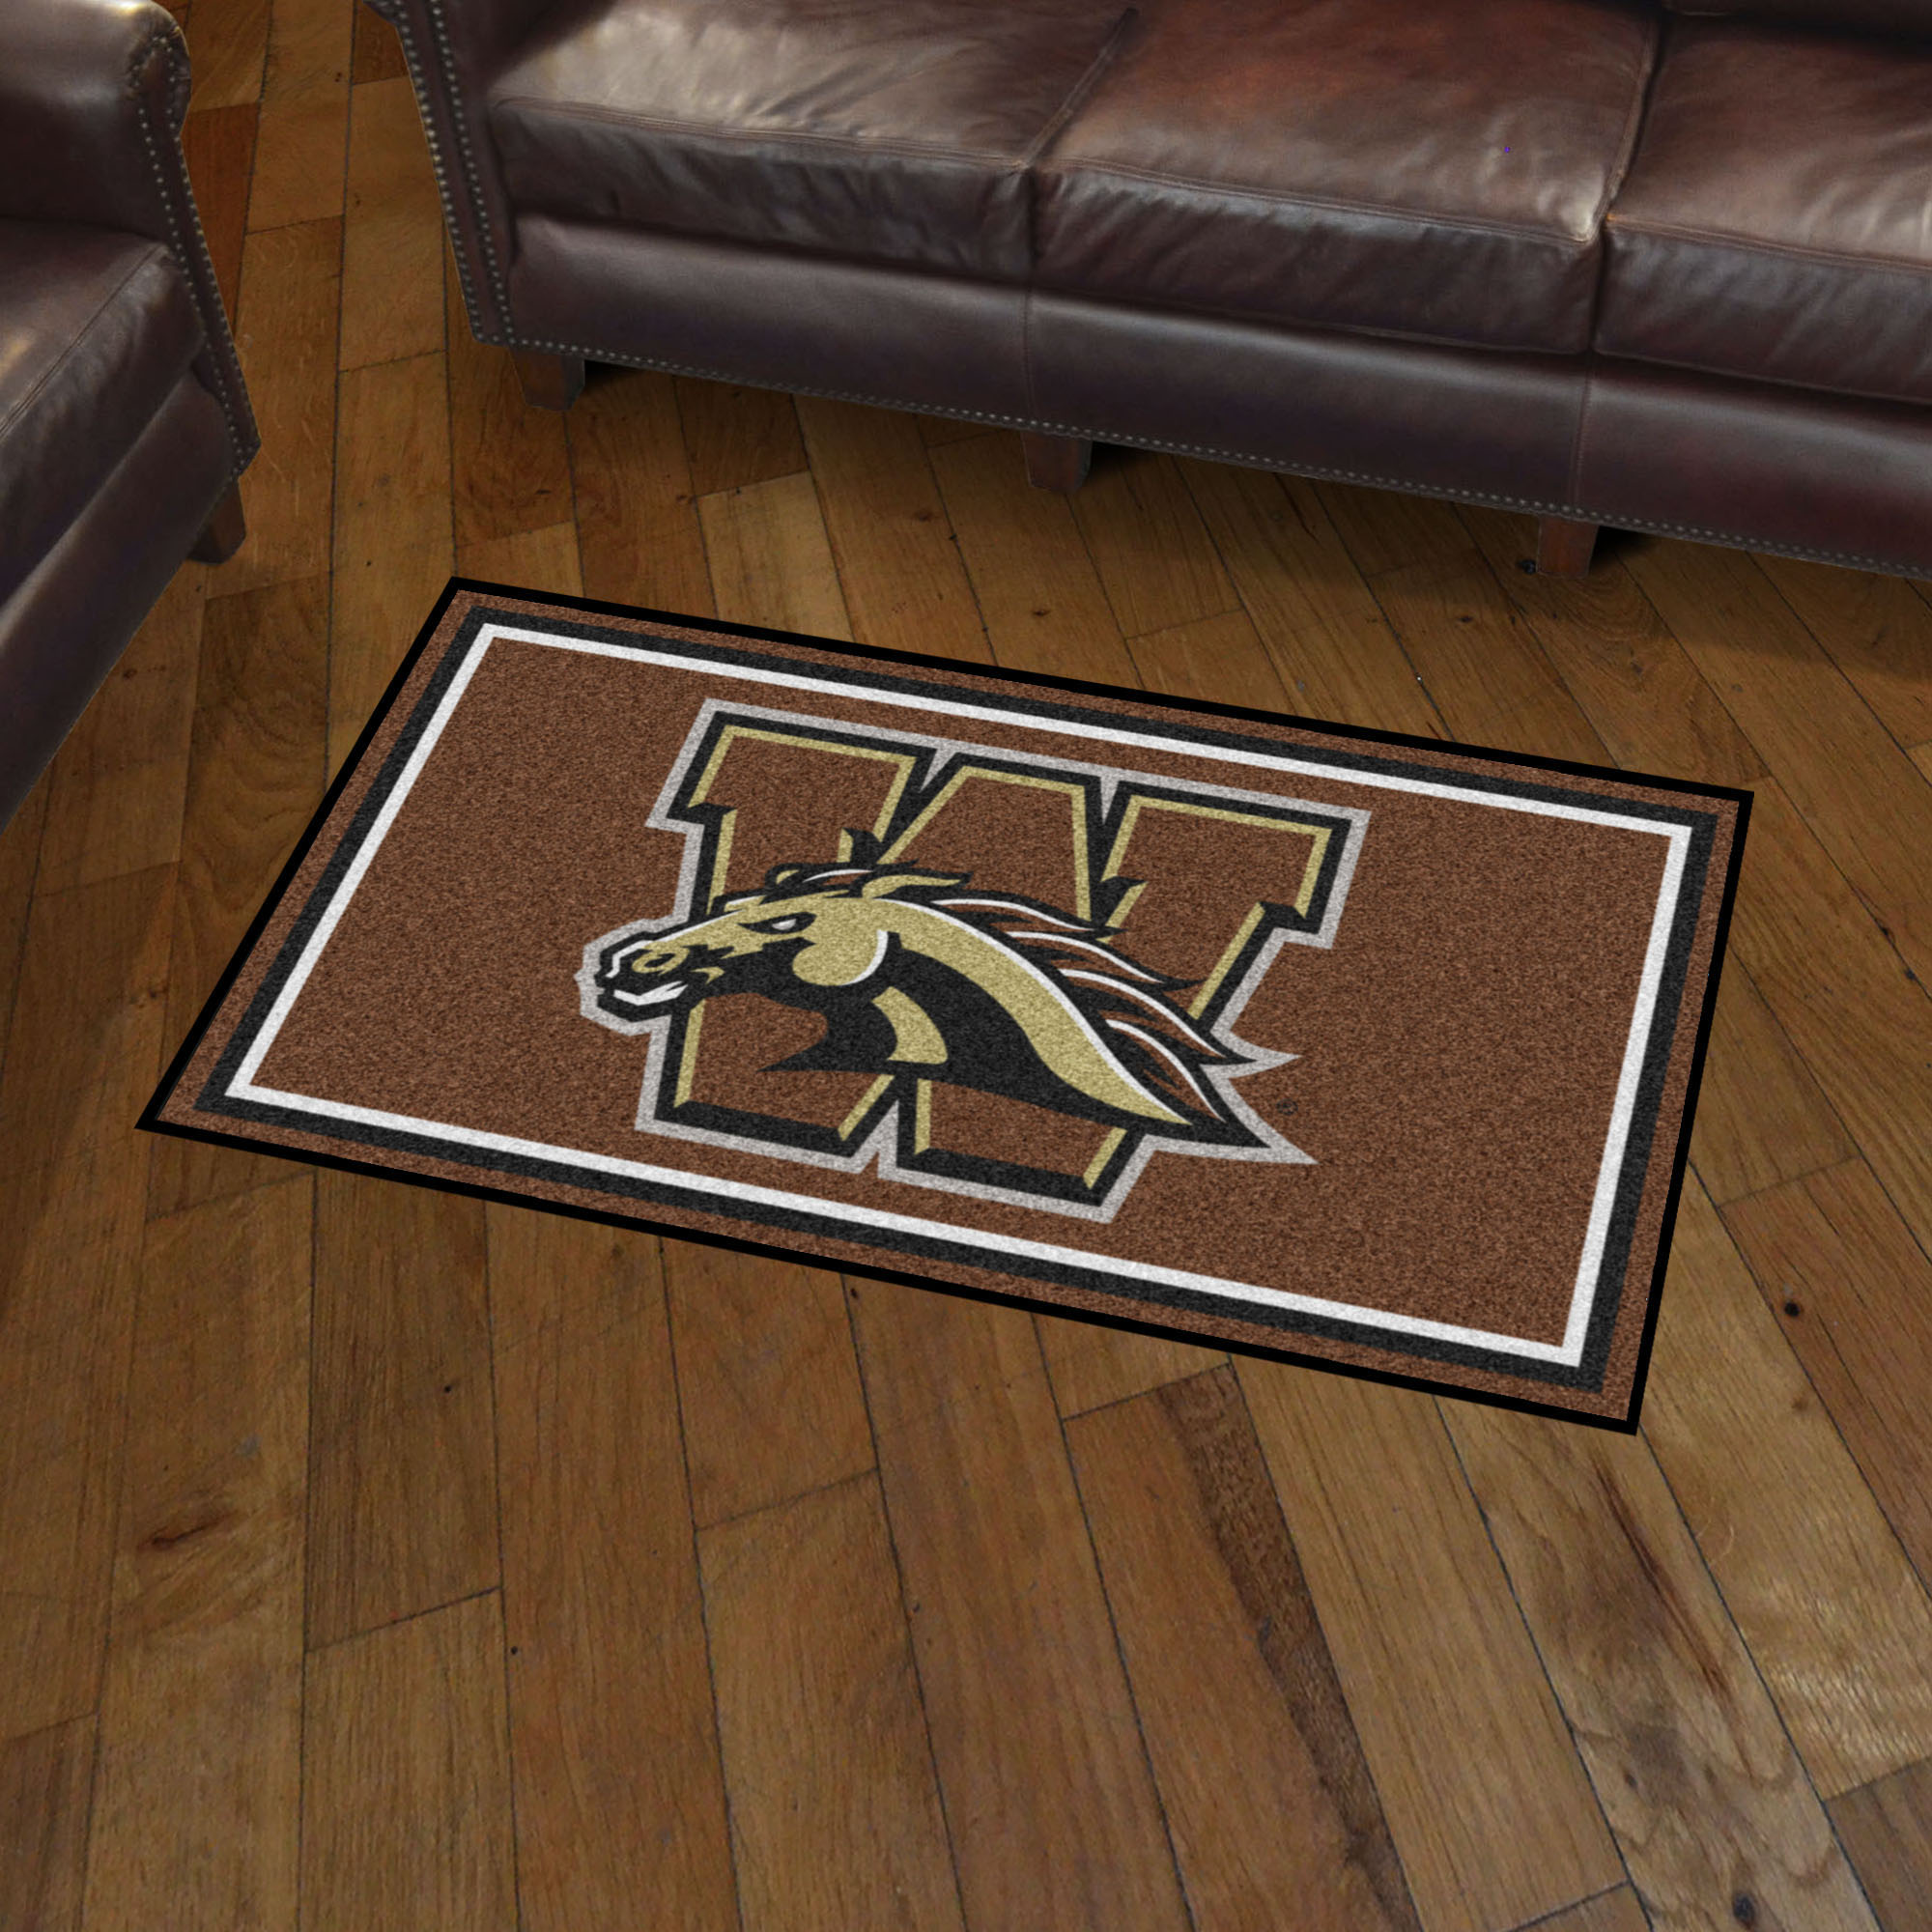 Hilltoppers Area Rug - 3' x 5' Nylon